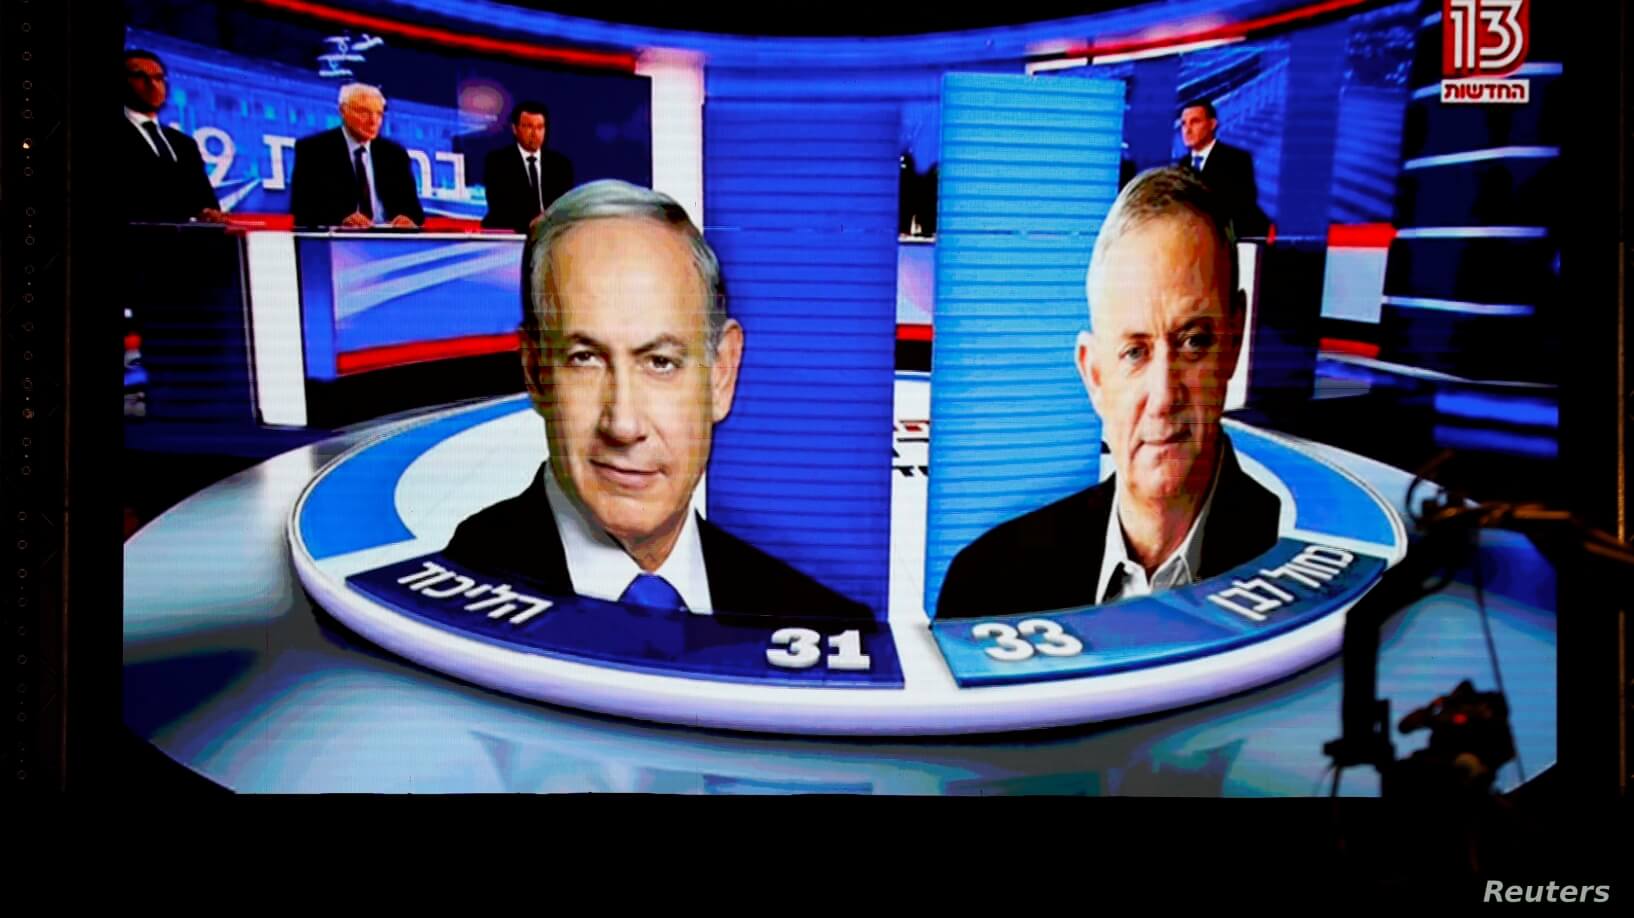 The results of the exit polls are shown on a screen at Benny Gantz's Blue and White party headquarters, following Israel's parliamentary election, in Tel Aviv, Israel, Sept. 17, 2019. (Photo: Reuters)